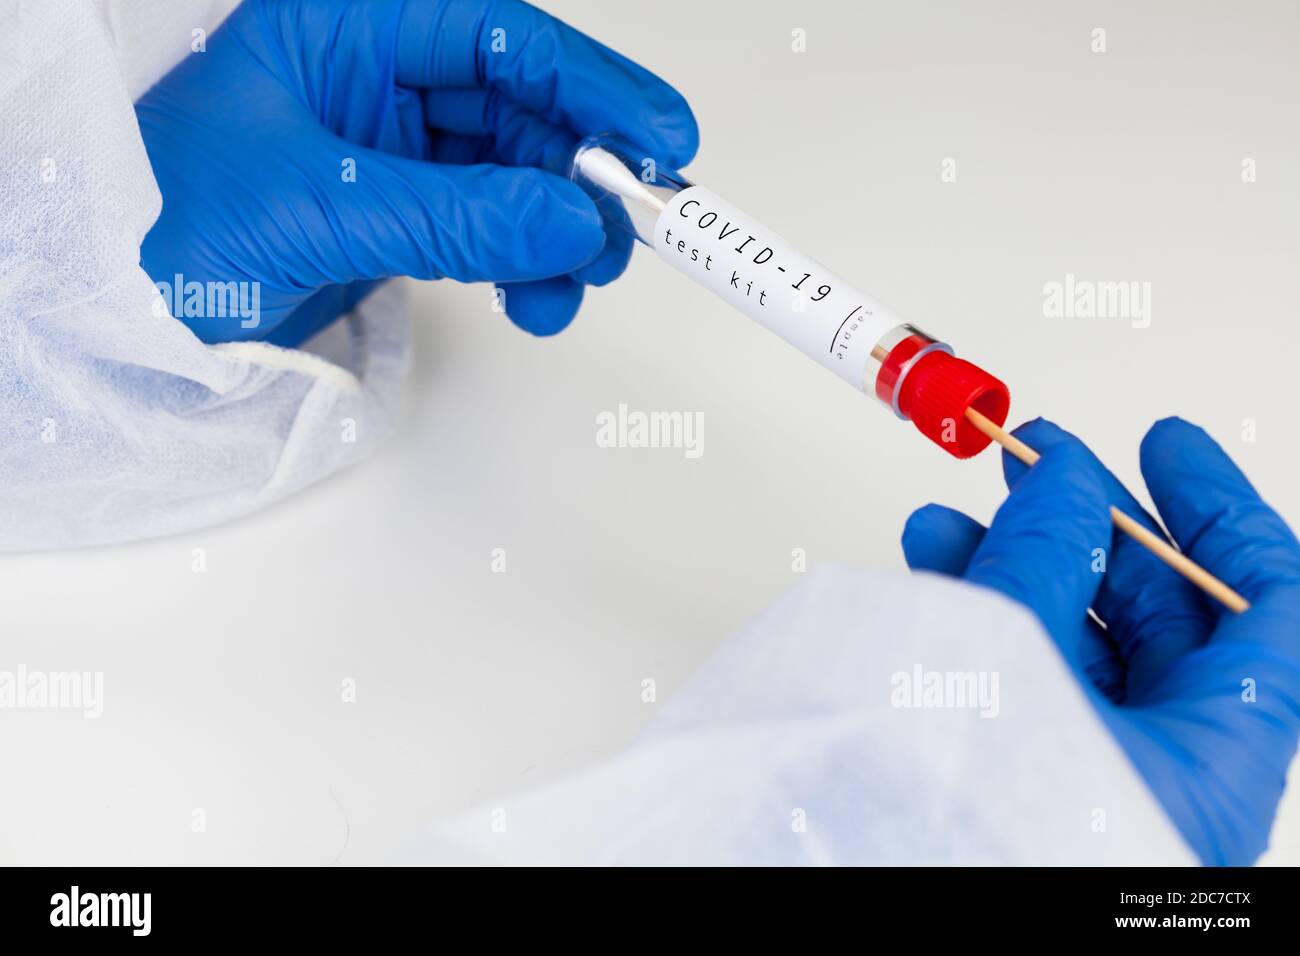 Coronavirus COVID-19 testing kit,swab collection equipment,sterile vacutainer with swabbing stick,closeup of hands in blue protective gloves holding t Stock Photo